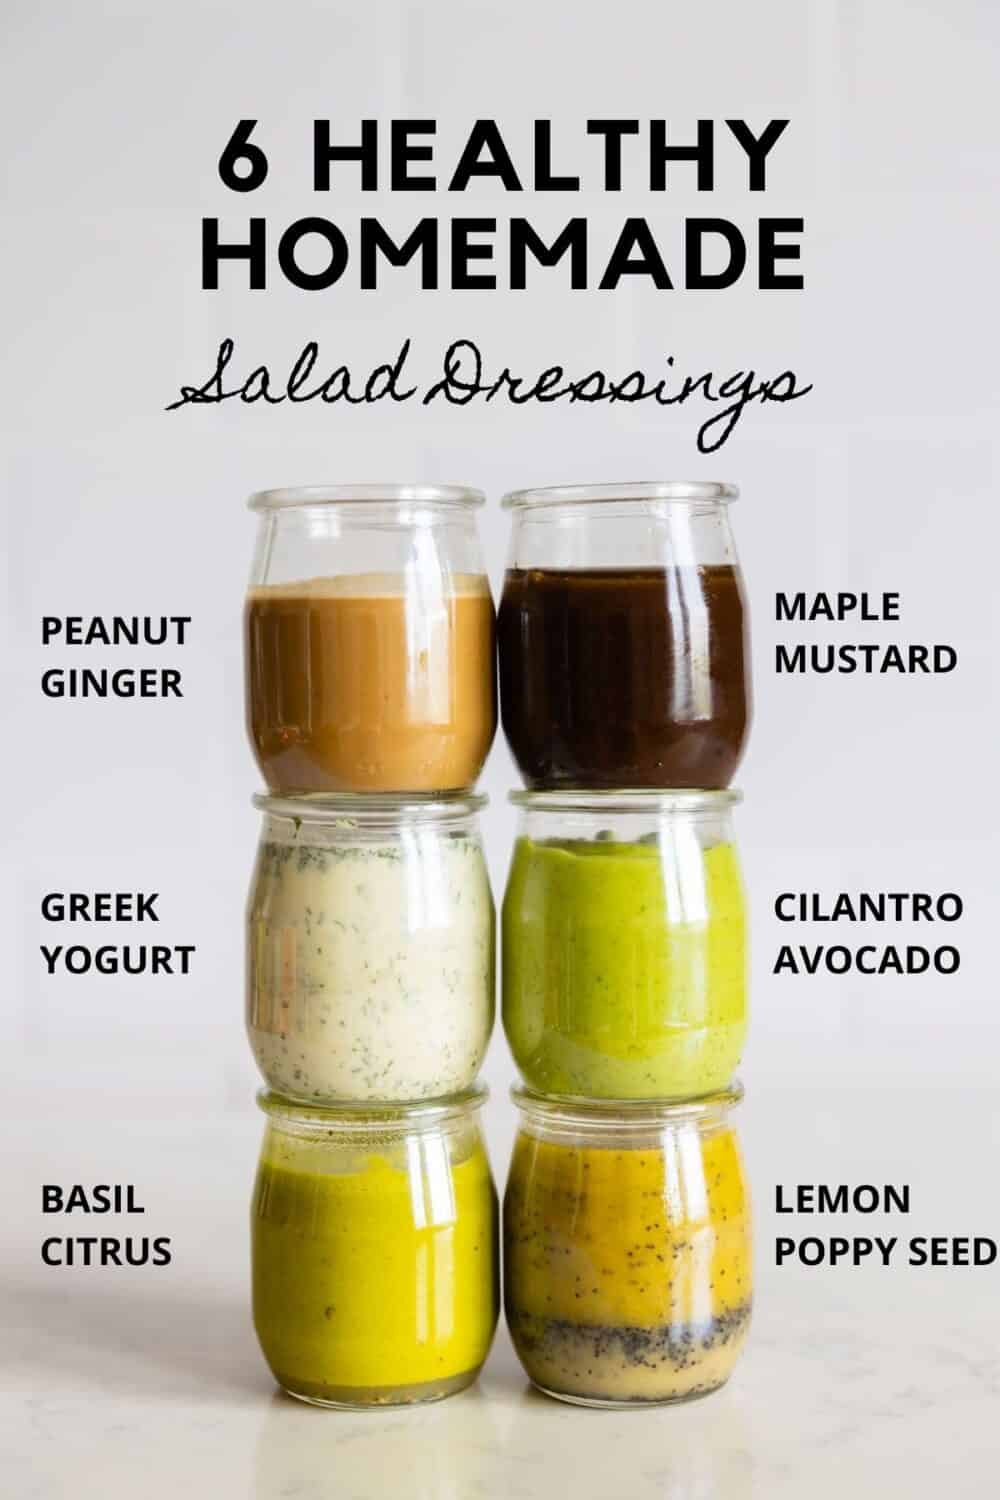 6 glass jars with salad dressings with title reading "6 healthy homemade salad dressings".